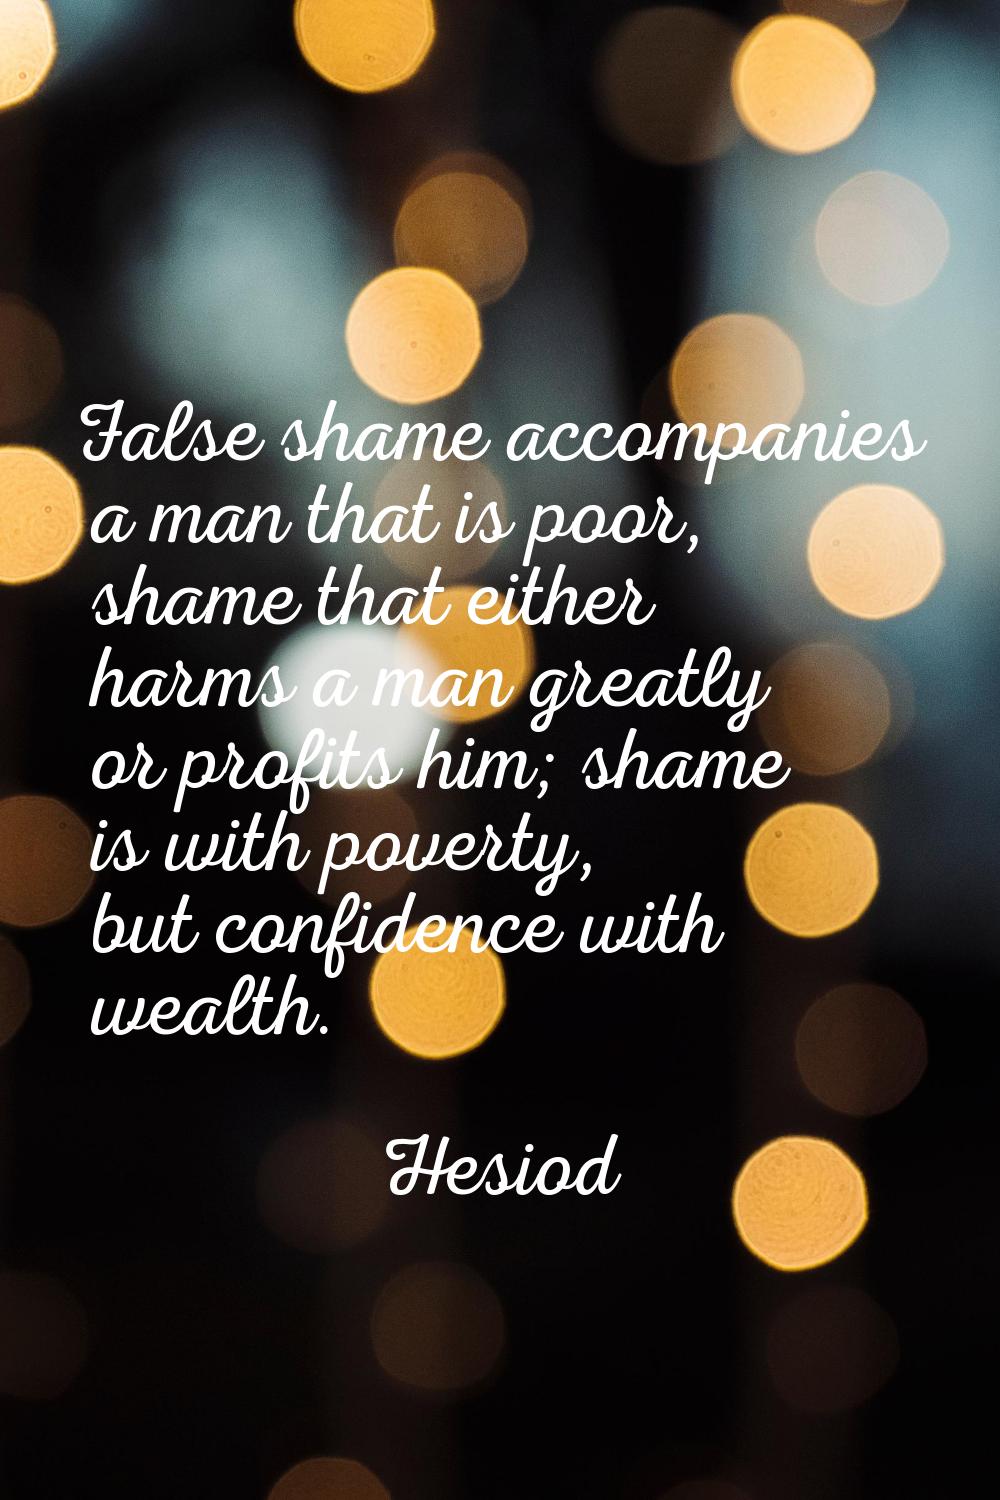 False shame accompanies a man that is poor, shame that either harms a man greatly or profits him; s